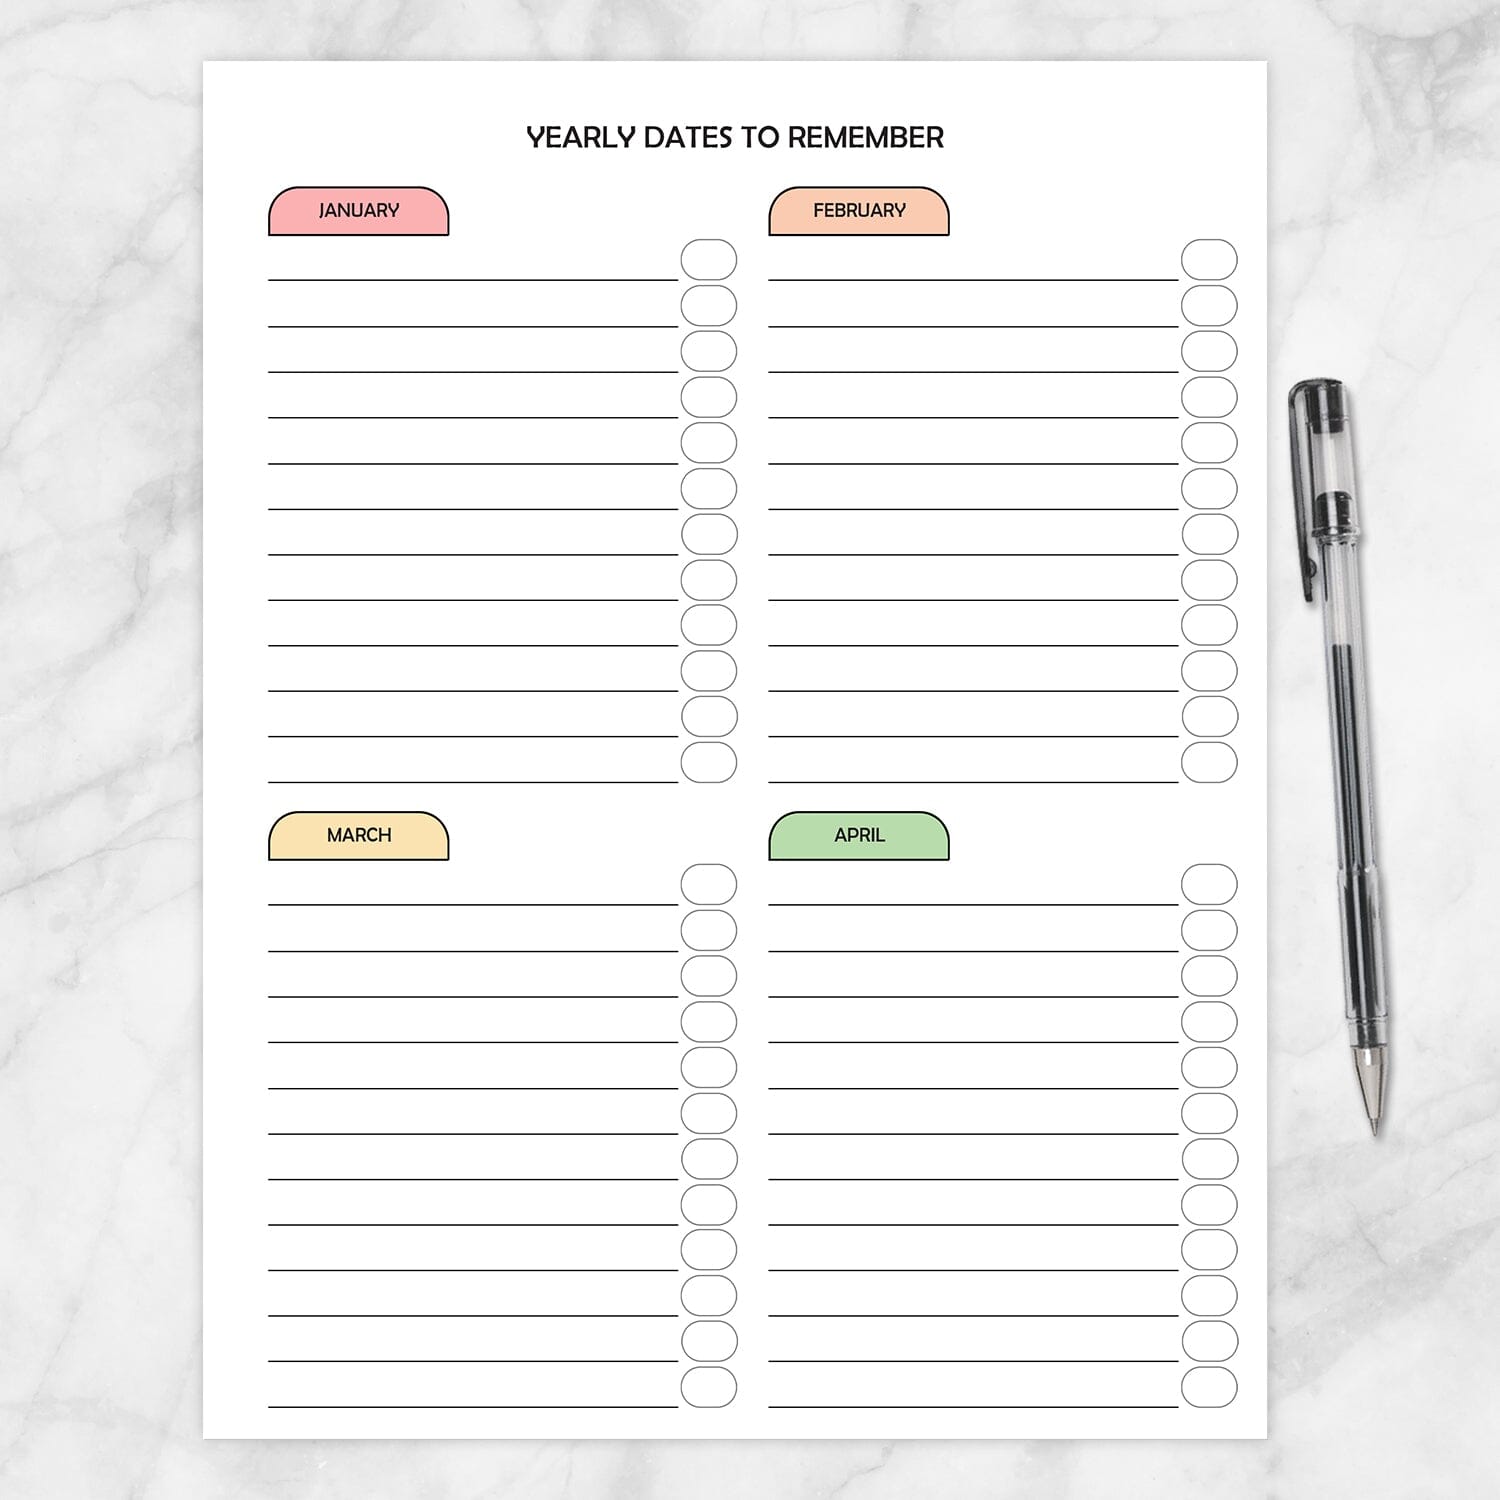 Printable Modern Yearly Dates to Remember Pages (page 1 of 3) at Printable Planning.